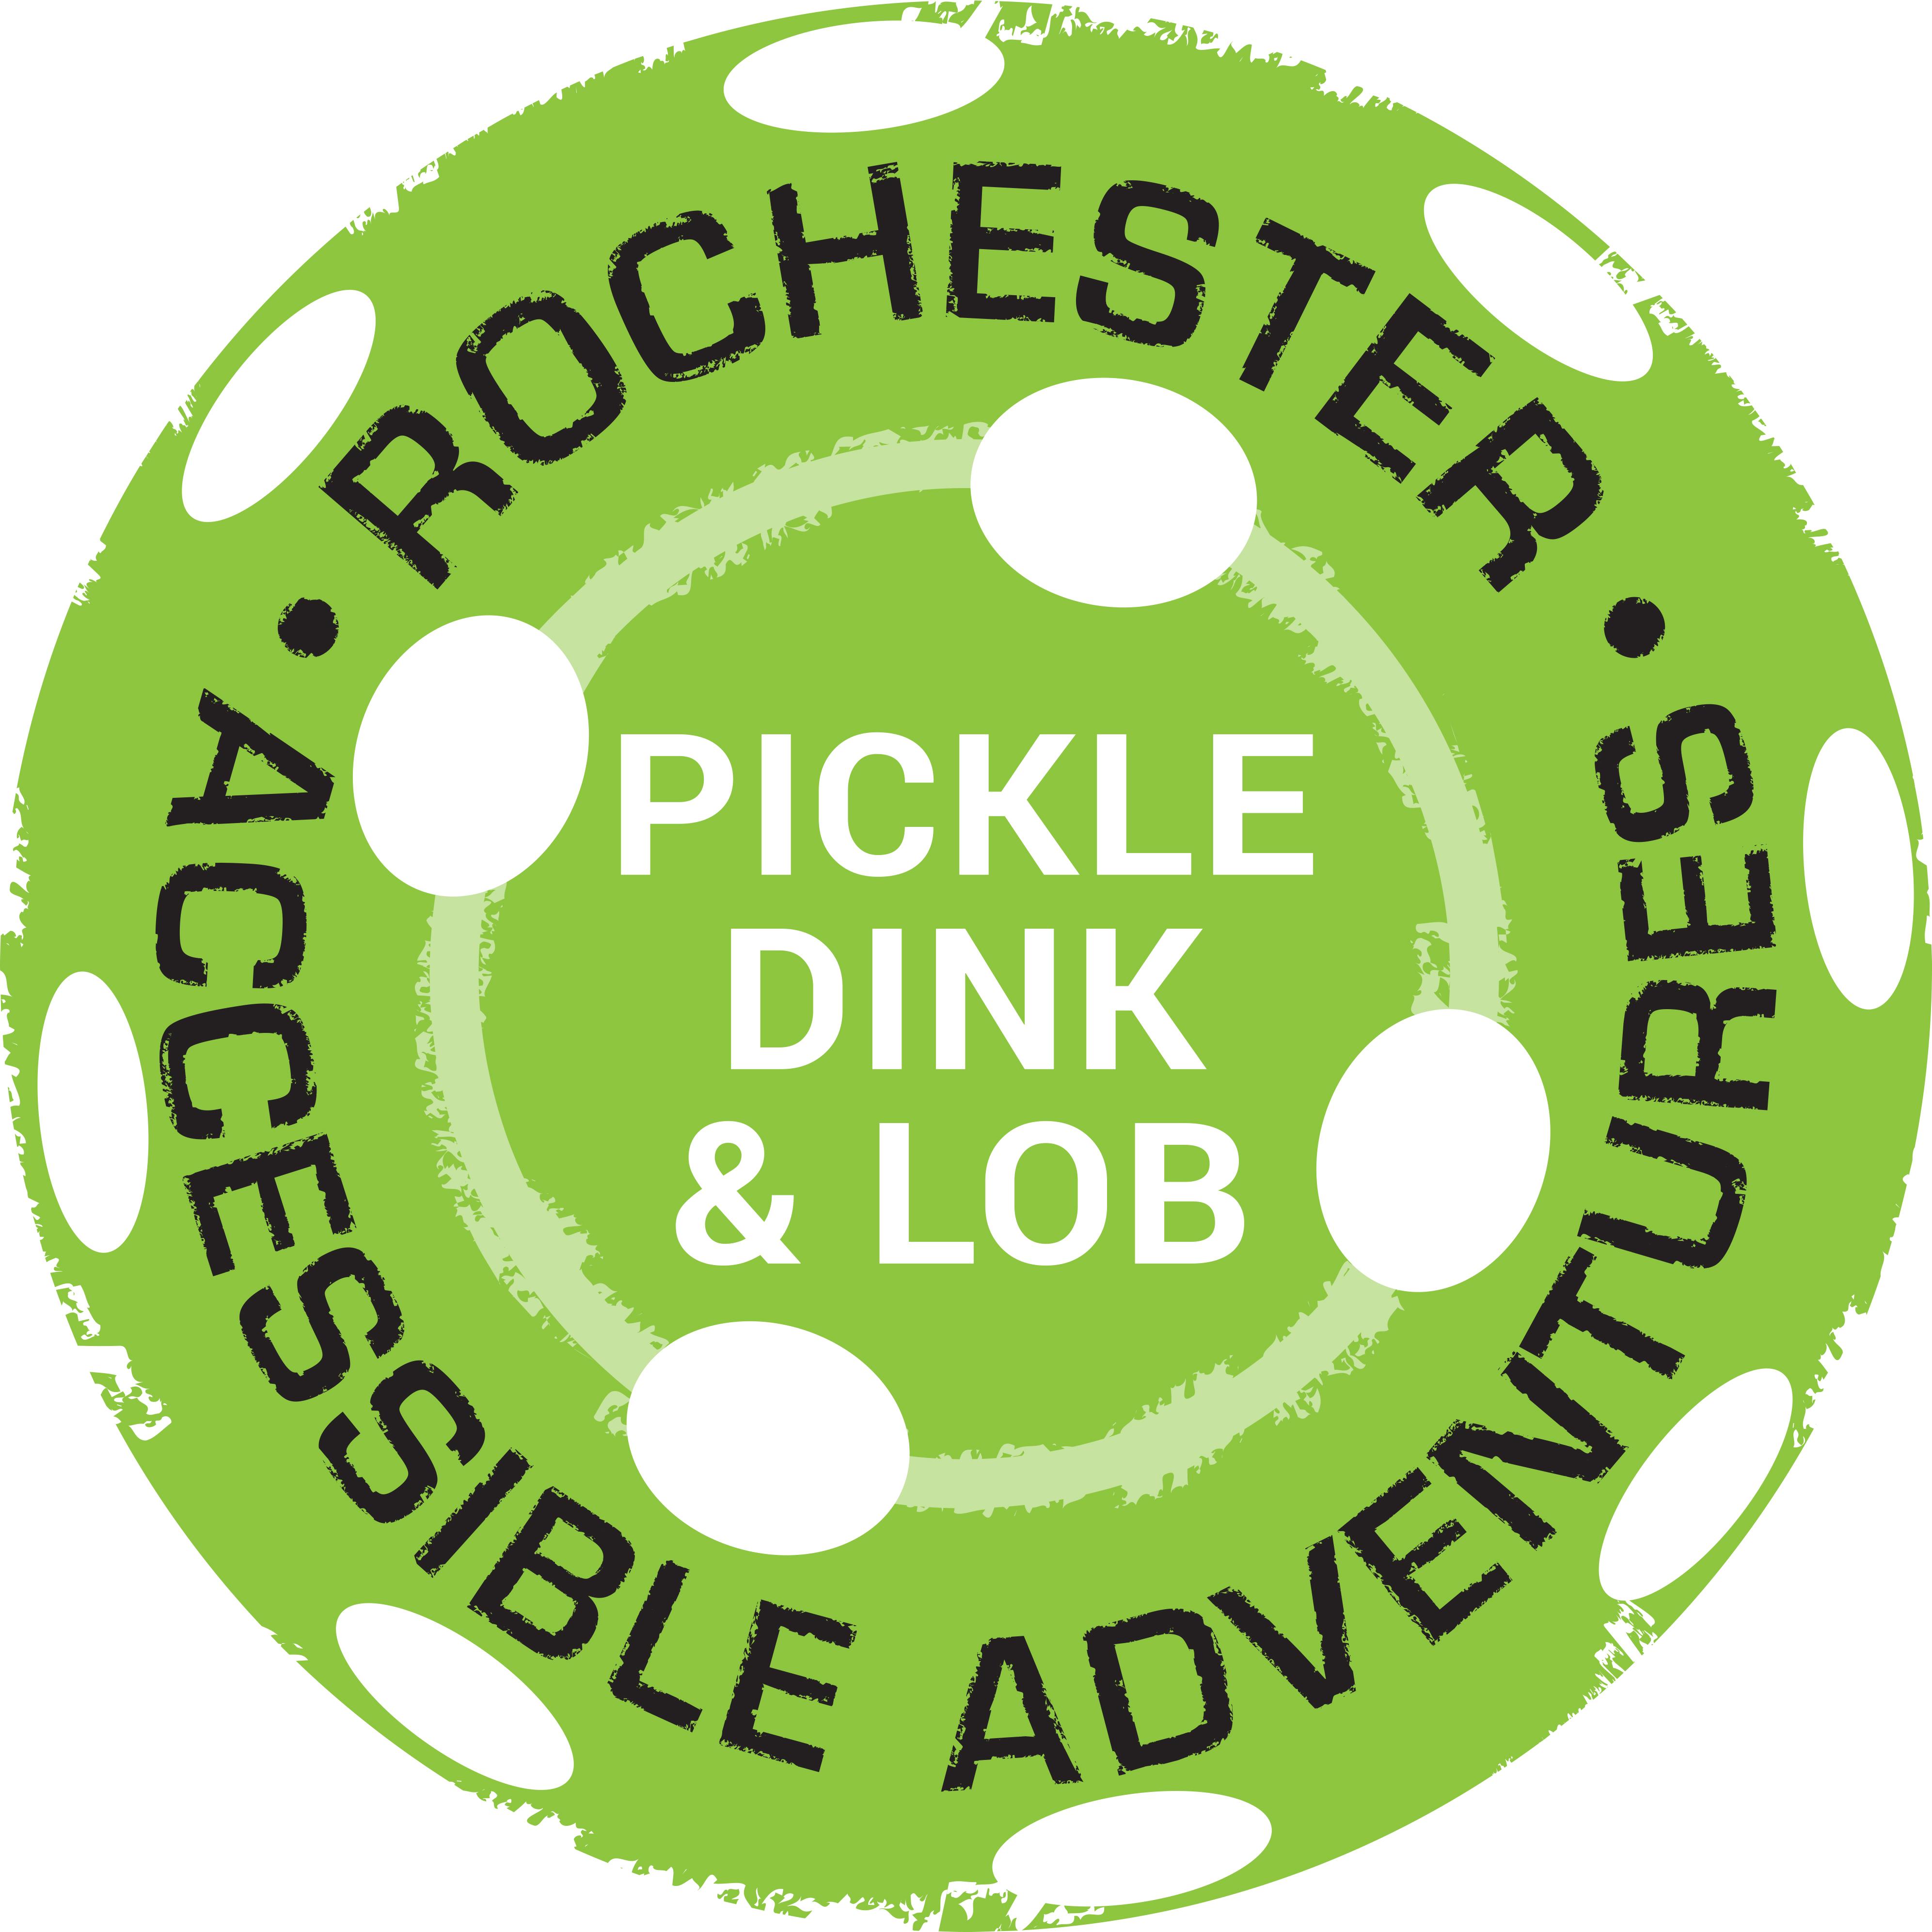 A graphic of a green pickleball with white holes; "Rochester Accessible Adventures" around the outer ring, "Pickle Dink & Lob" on the inside